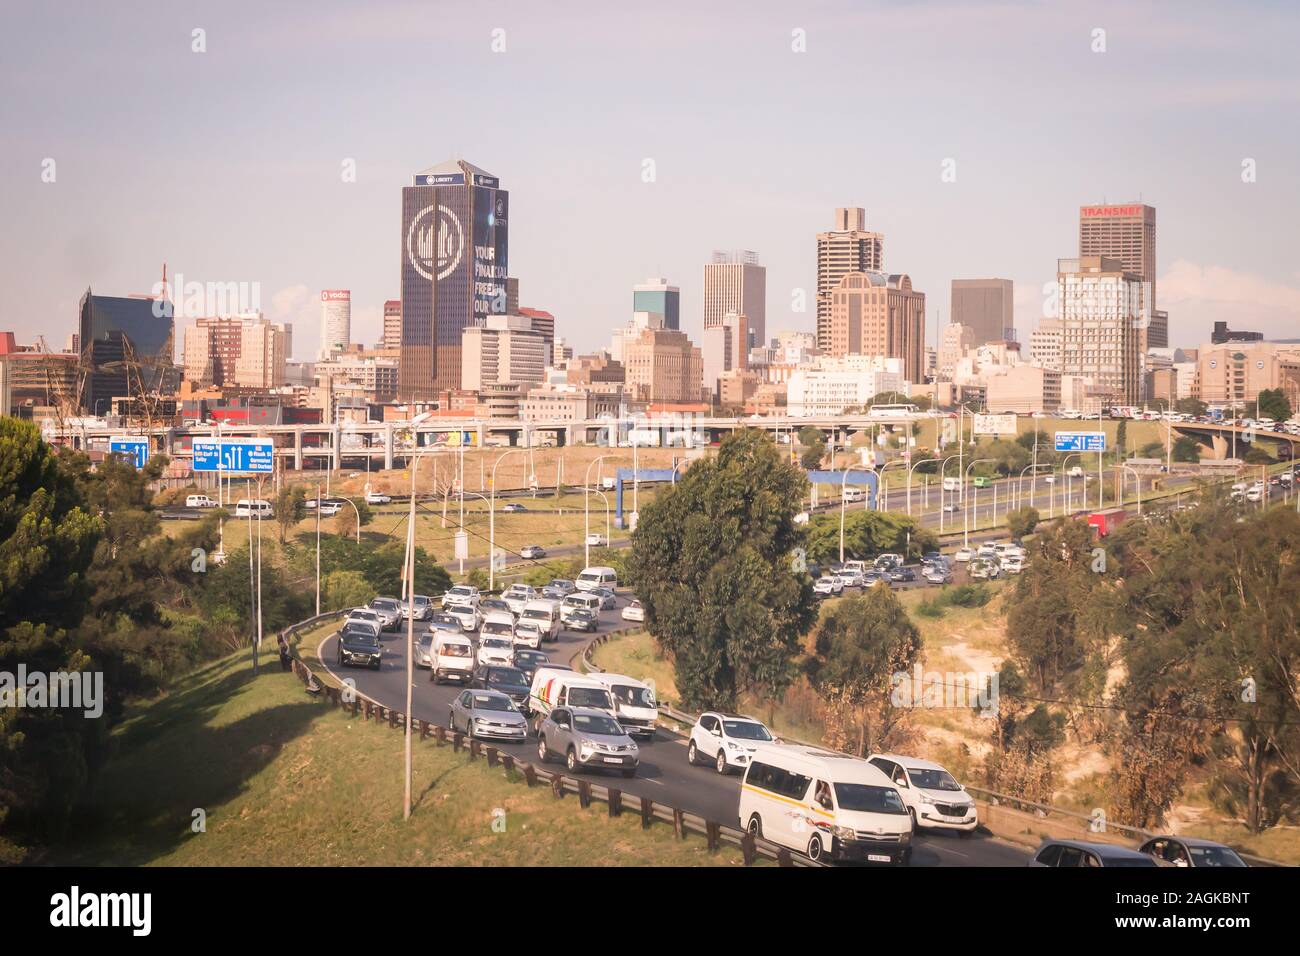 Johannesburg, South Africa - December 3,2019 - view of skysracpers in the city centre and the traffic on a motorway Stock Photo